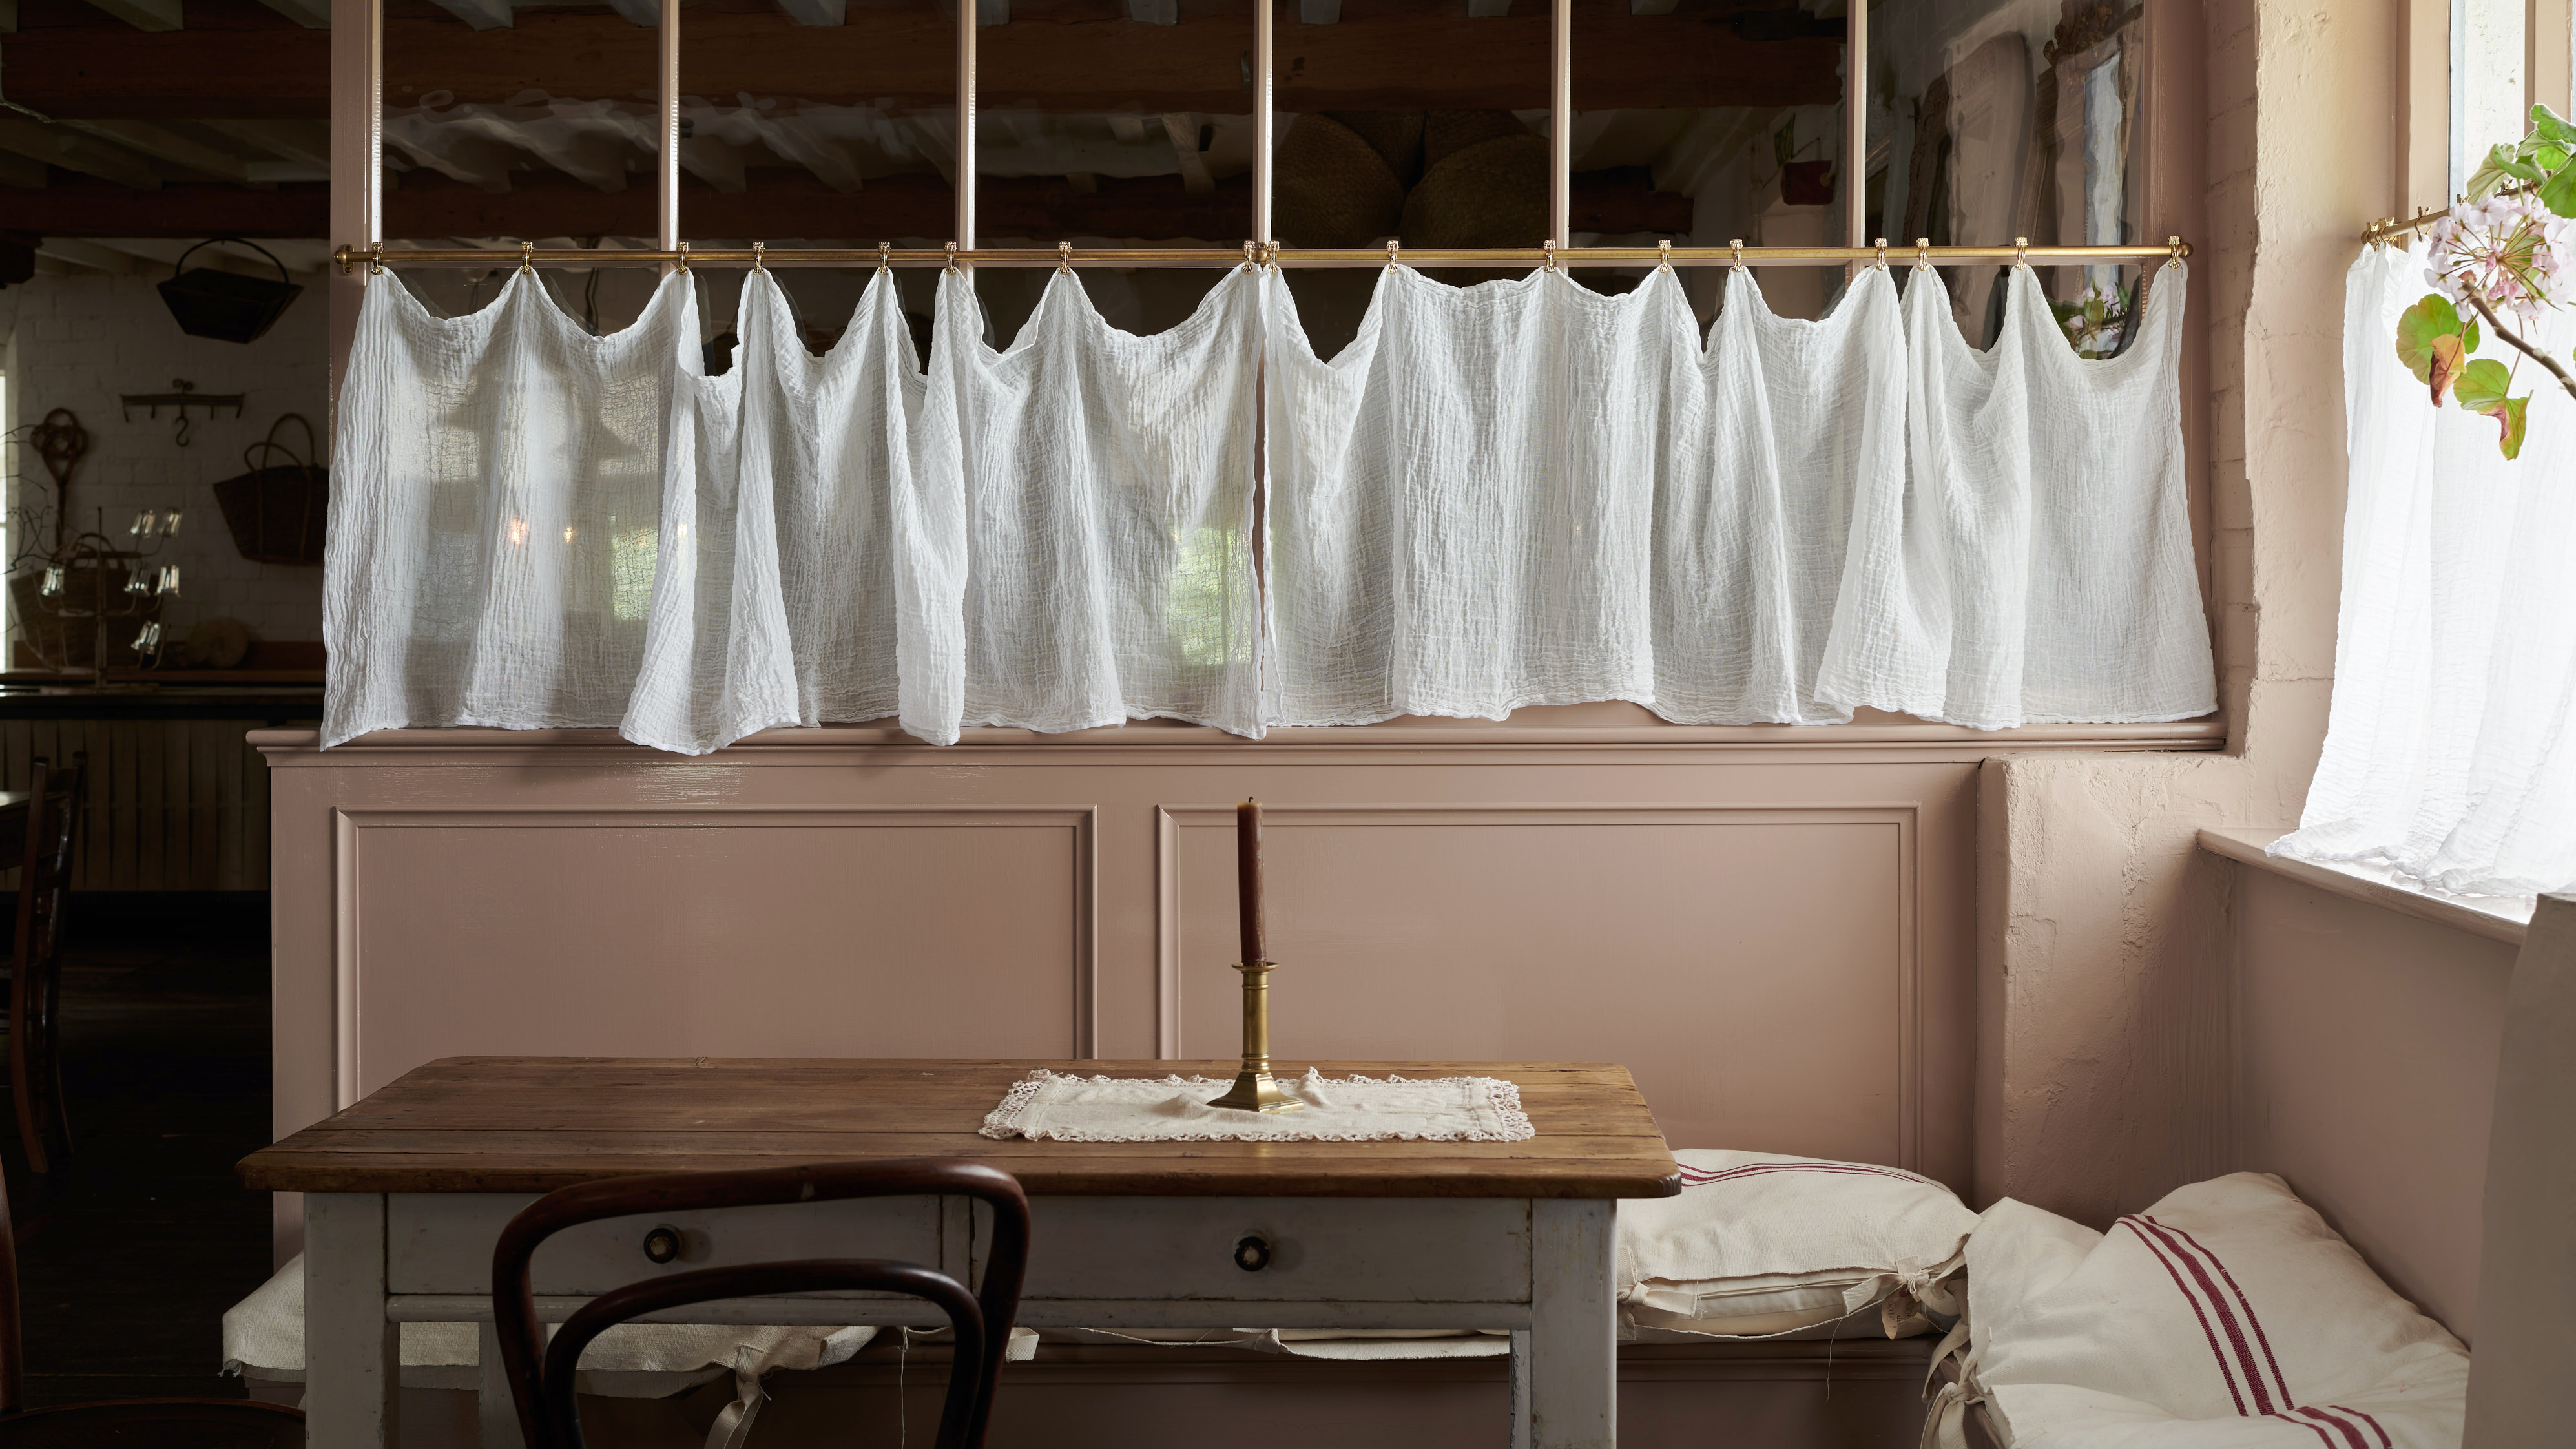 French cafe curtains – the chic new kitchen trend | Livingetc